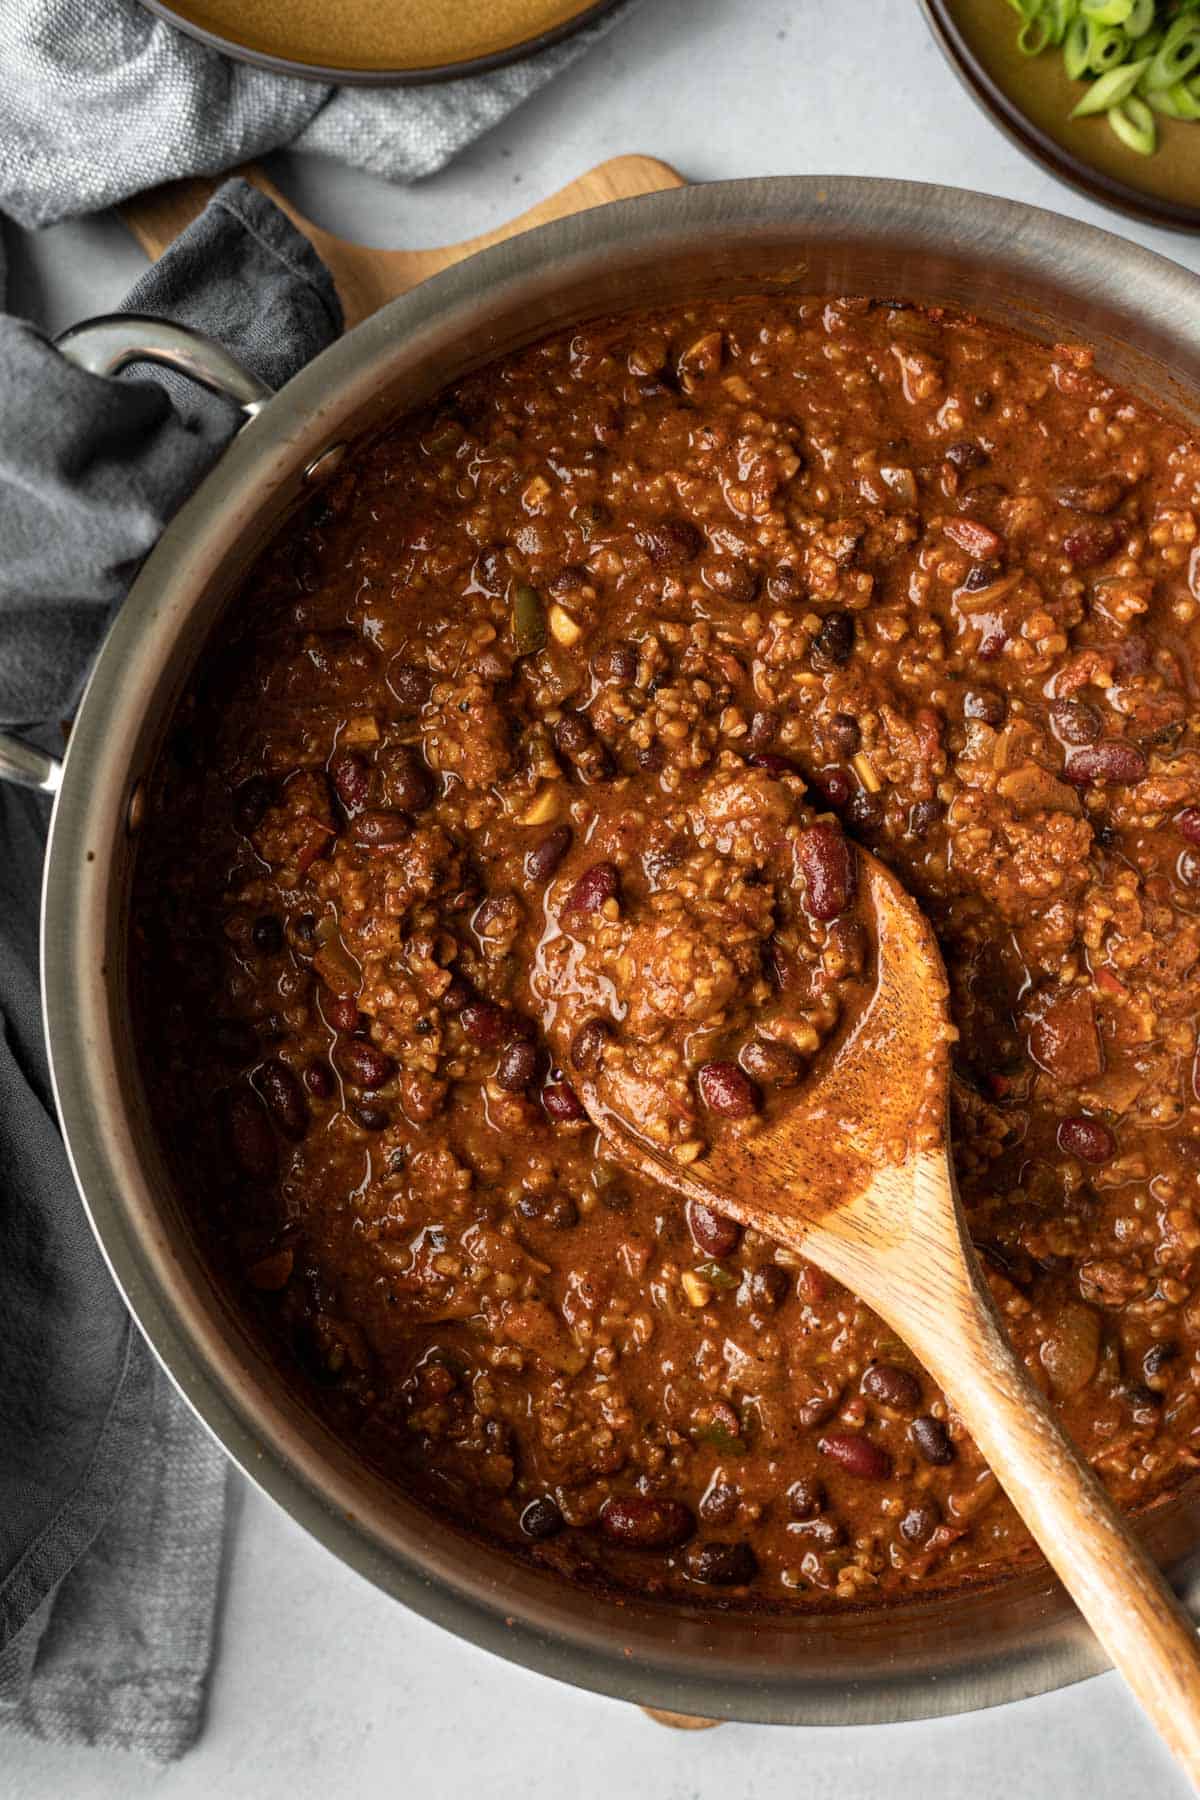 wooden spoon scooping up Beyond Meat chili from a large pot.